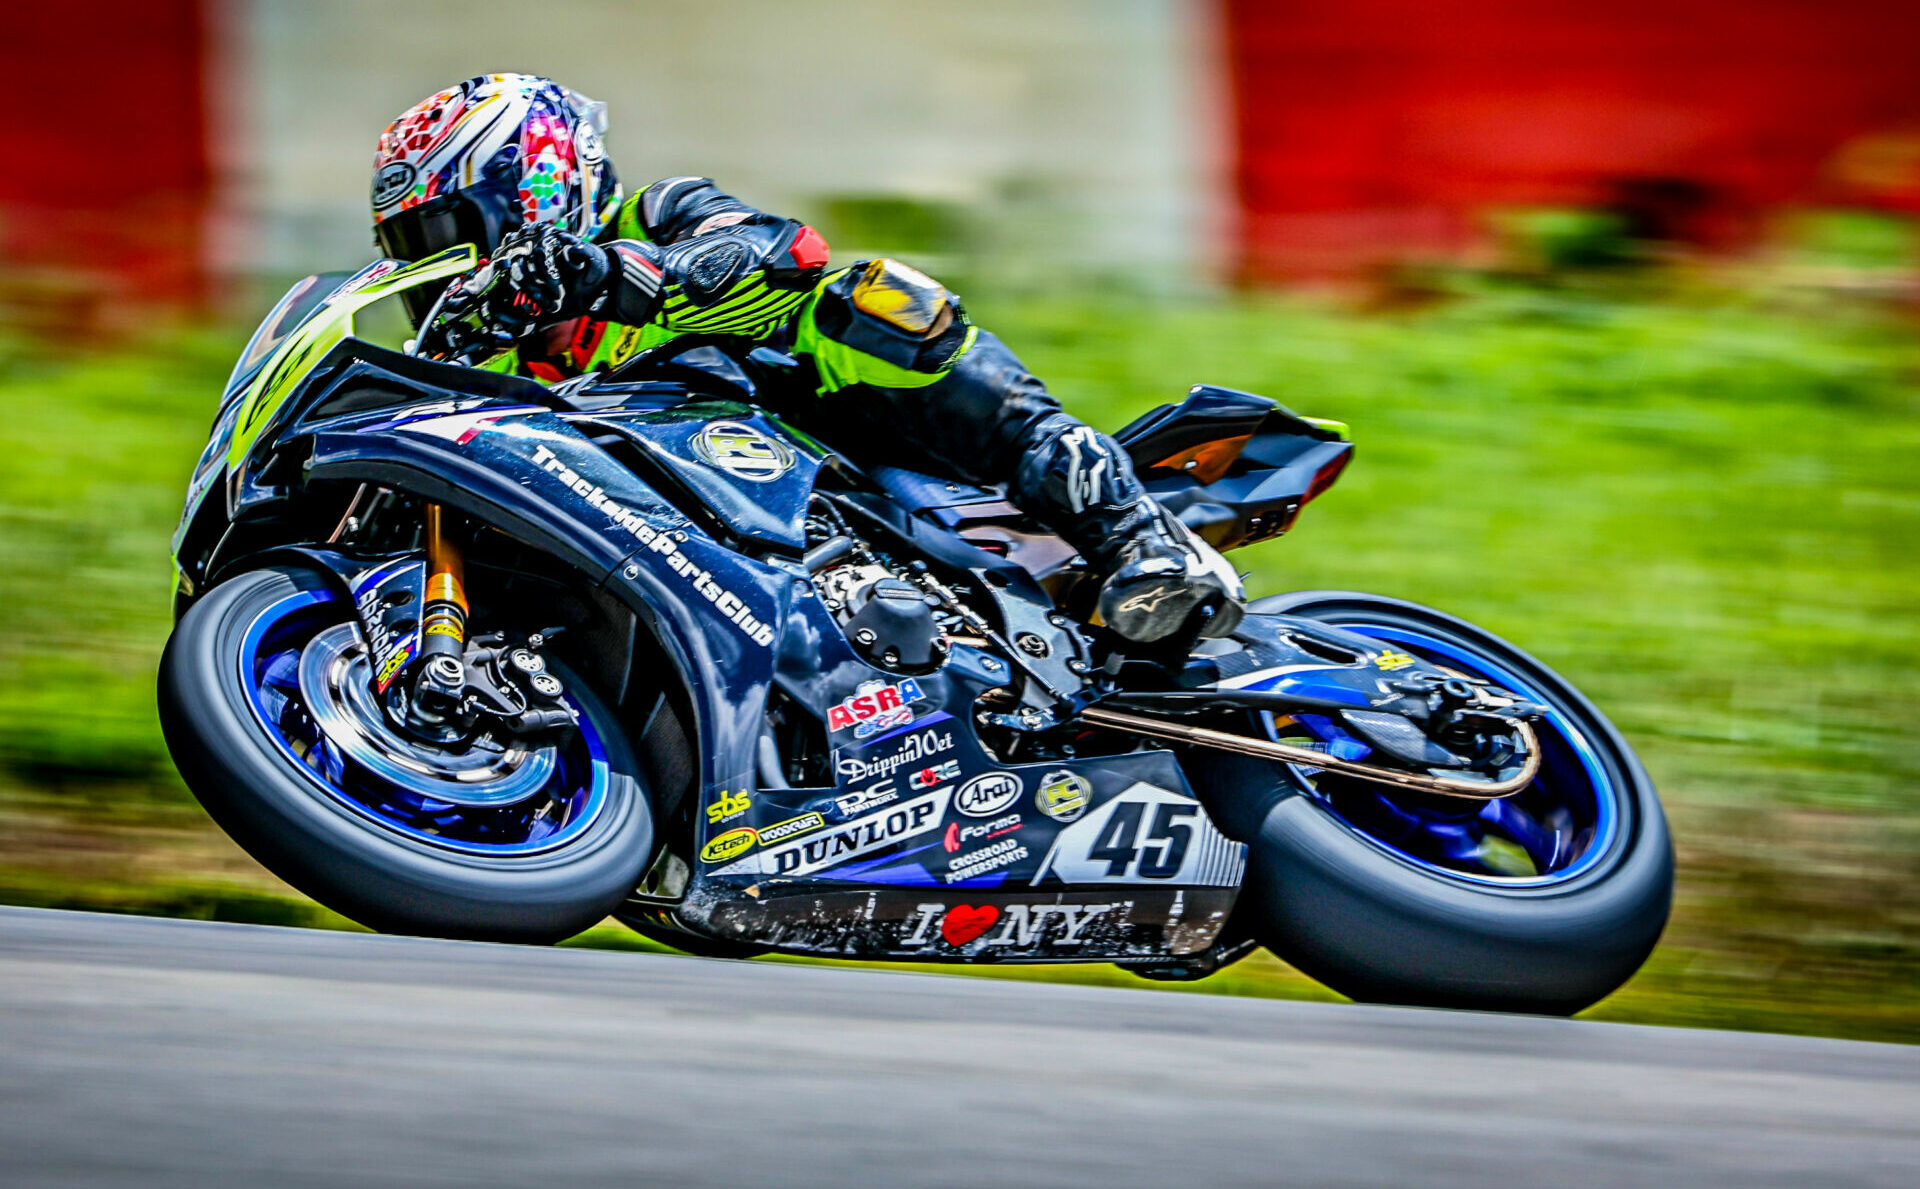 Mark Heckles (45) won the ASRA Superstock race at NCBIKE. Photo by Apex Pro Photo, courtesy ASRA.